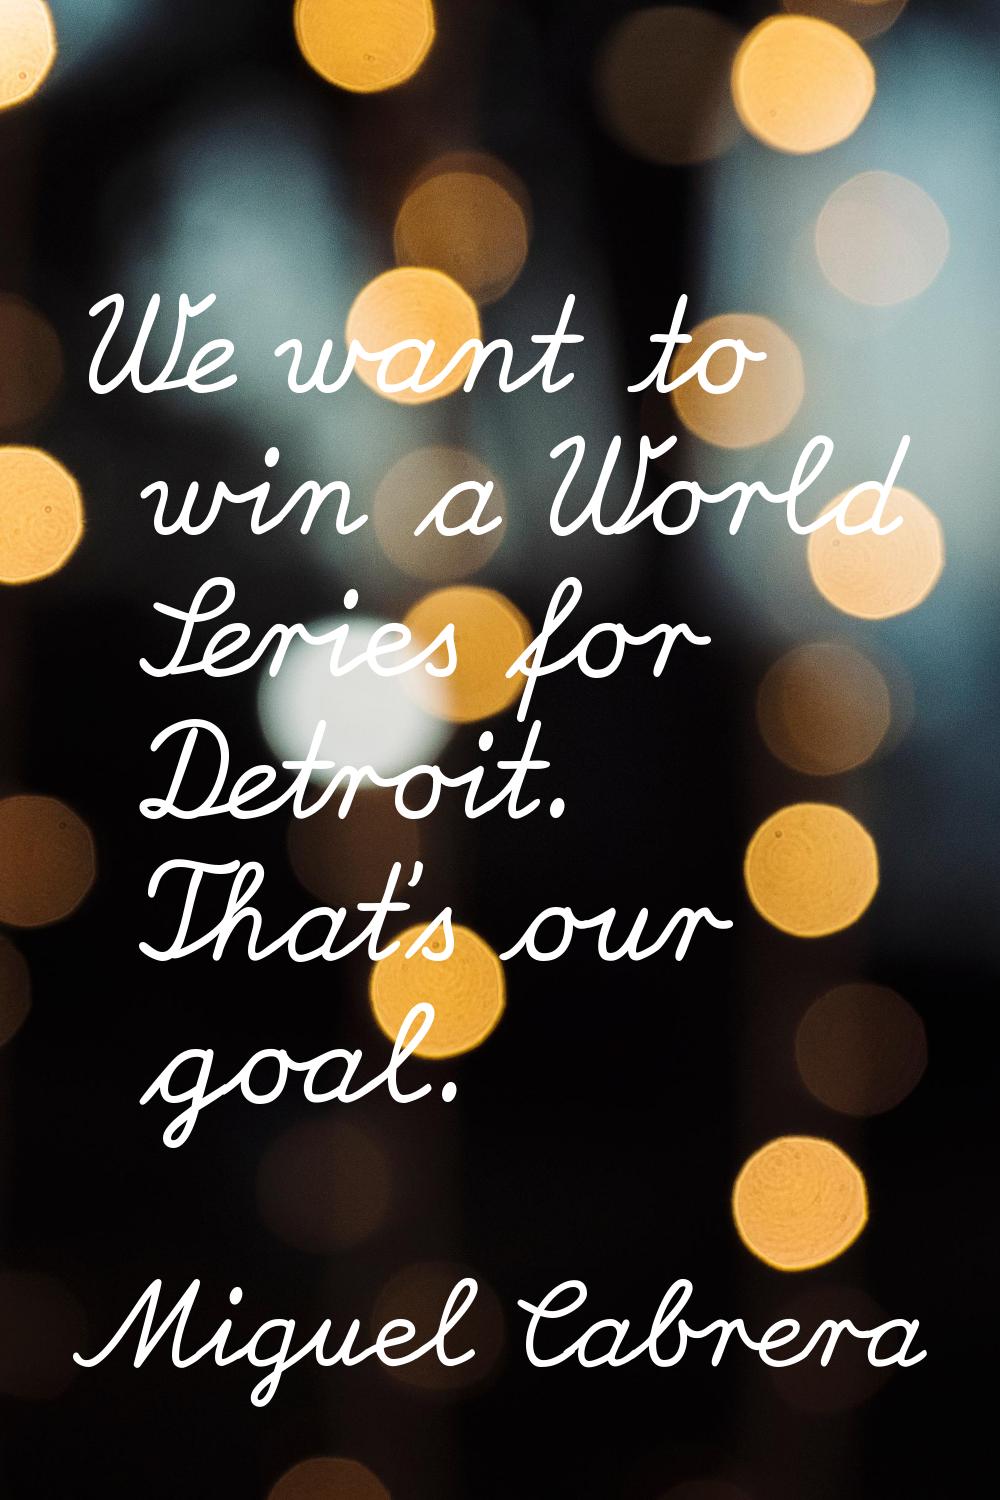 We want to win a World Series for Detroit. That's our goal.